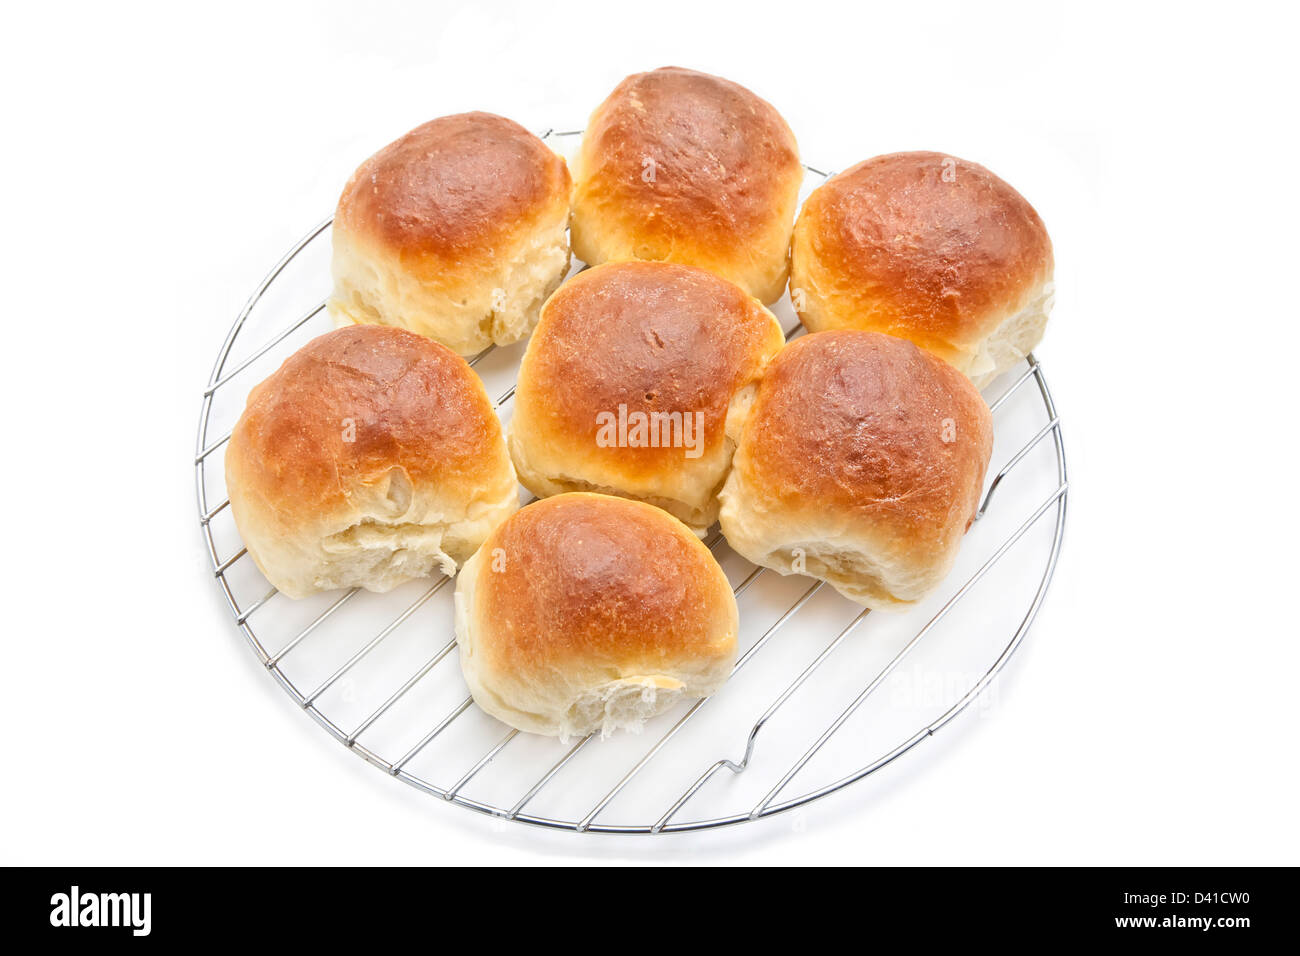 Homemade white bread rolls on a wire baking rack Stock Photo